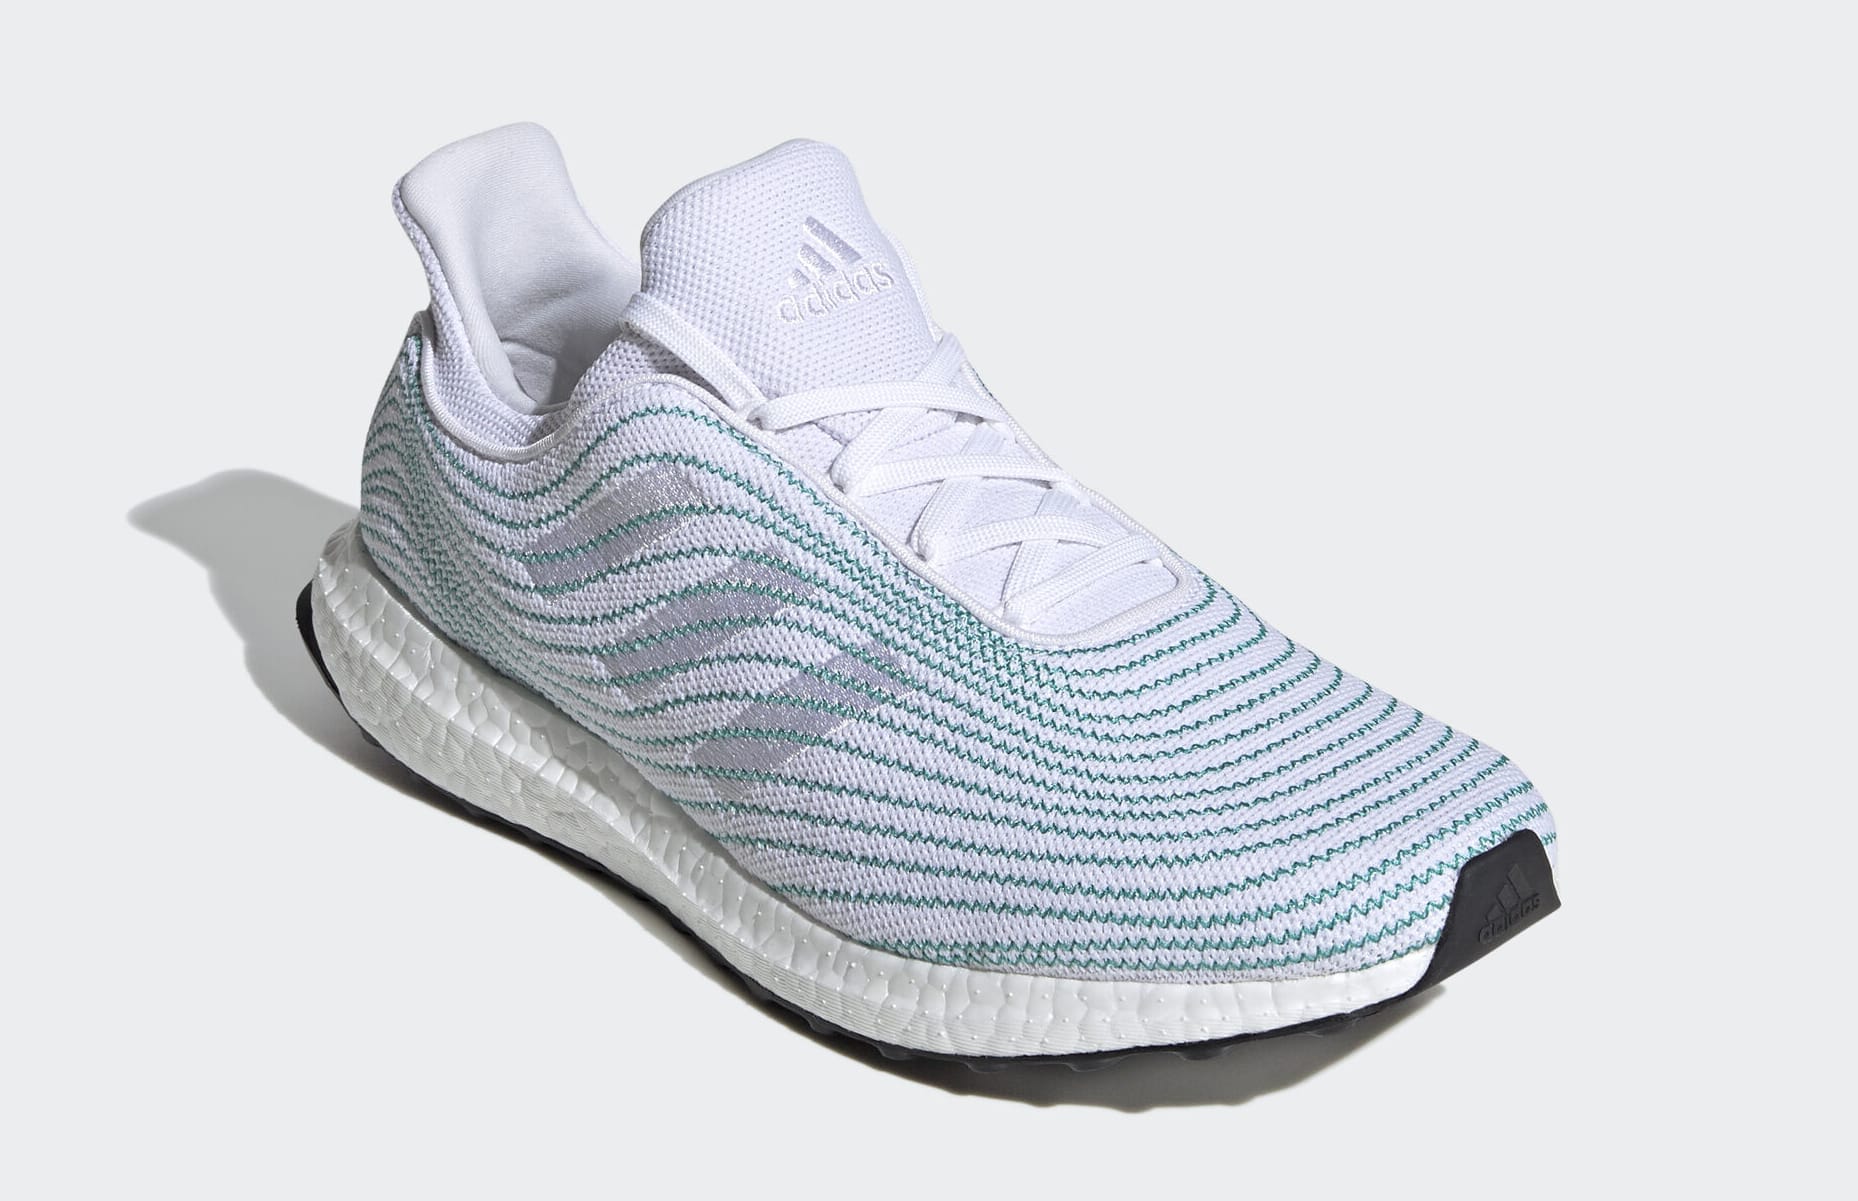 Parley x Adidas Ultra Boost Uncaged EH1173 Front